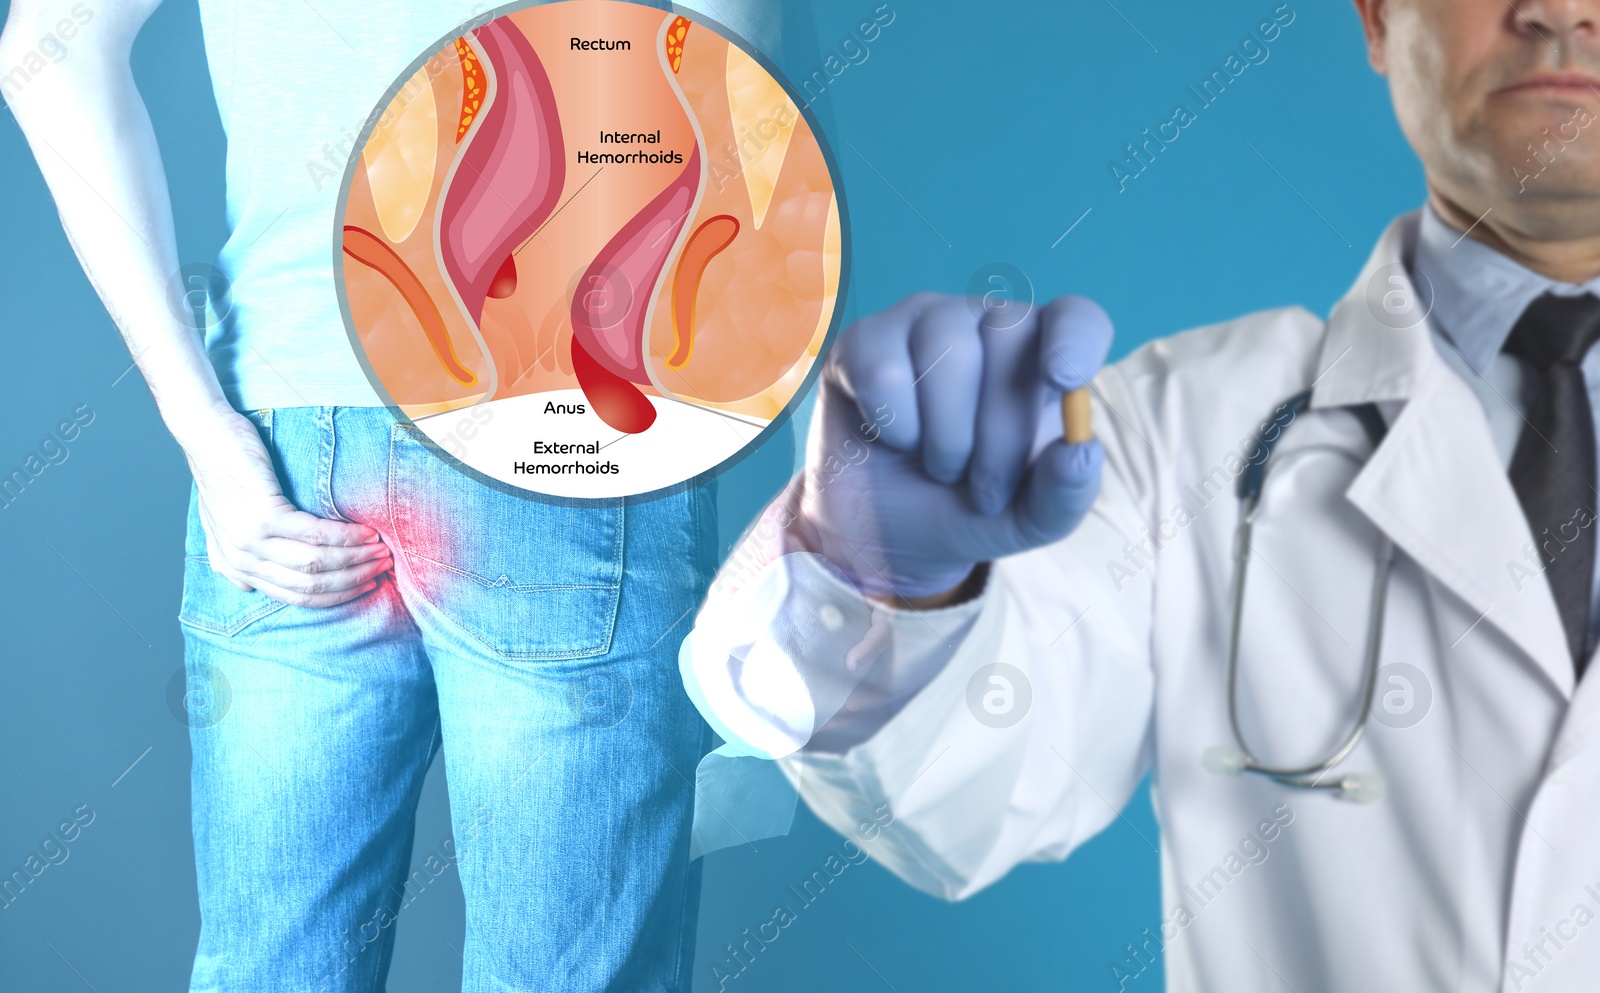 Image of Doctor holding suppository near man suffering from hemorrhoid pain. Illustration of unhealthy lower rectum